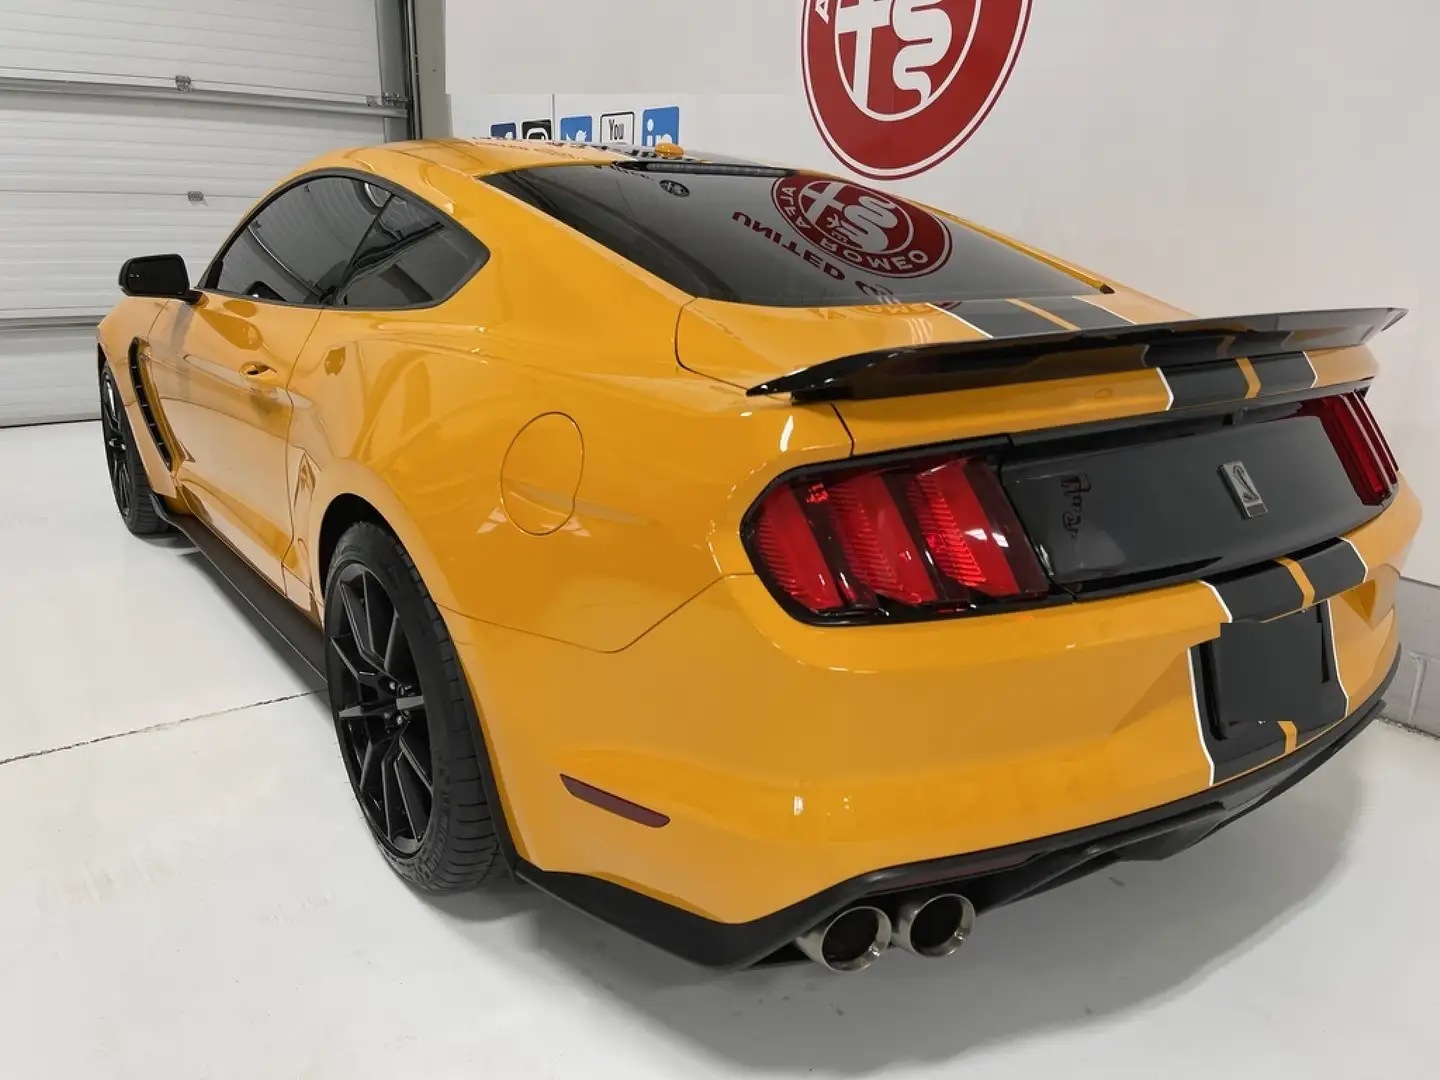 Ford Mustang SHELBY GT350 5.2L V8 GT 350 2018 - 2